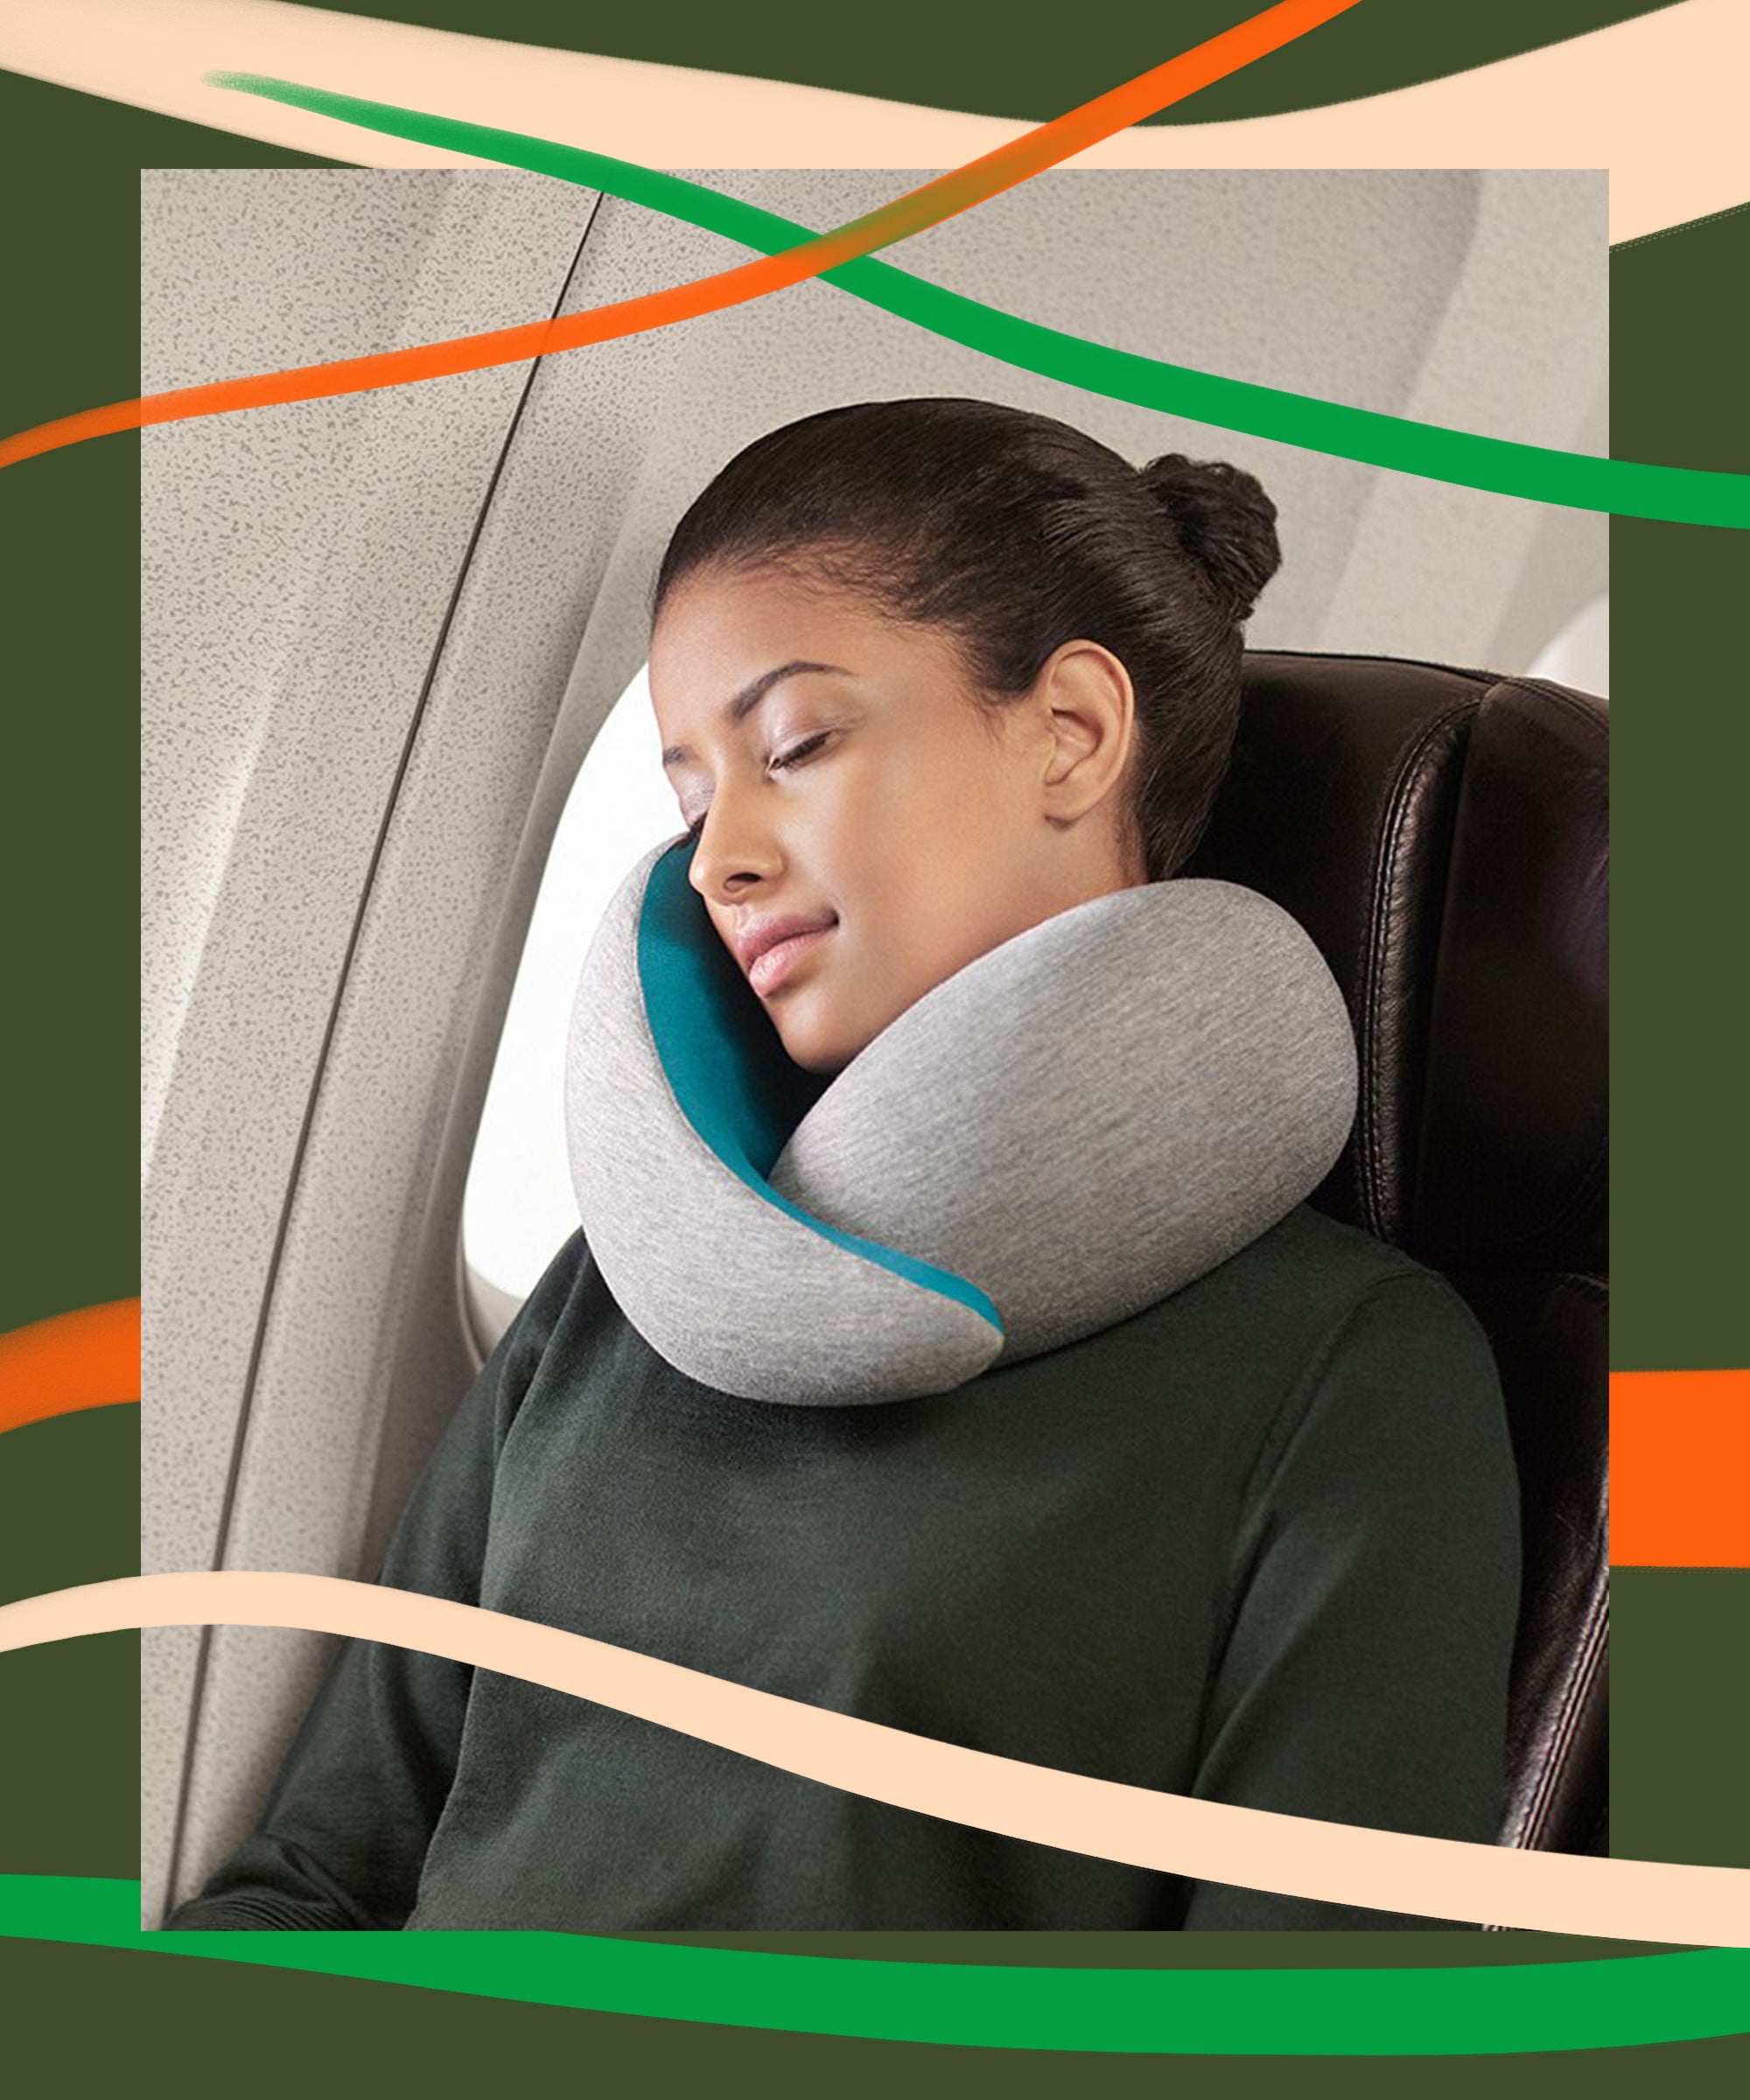 Liaosax Girl Travel Pillow Bright Color Coral Ocean Life Memory Foam Neck & Head Support Print Lightweight Travel Pillow for Flight Travel Office Best Gift